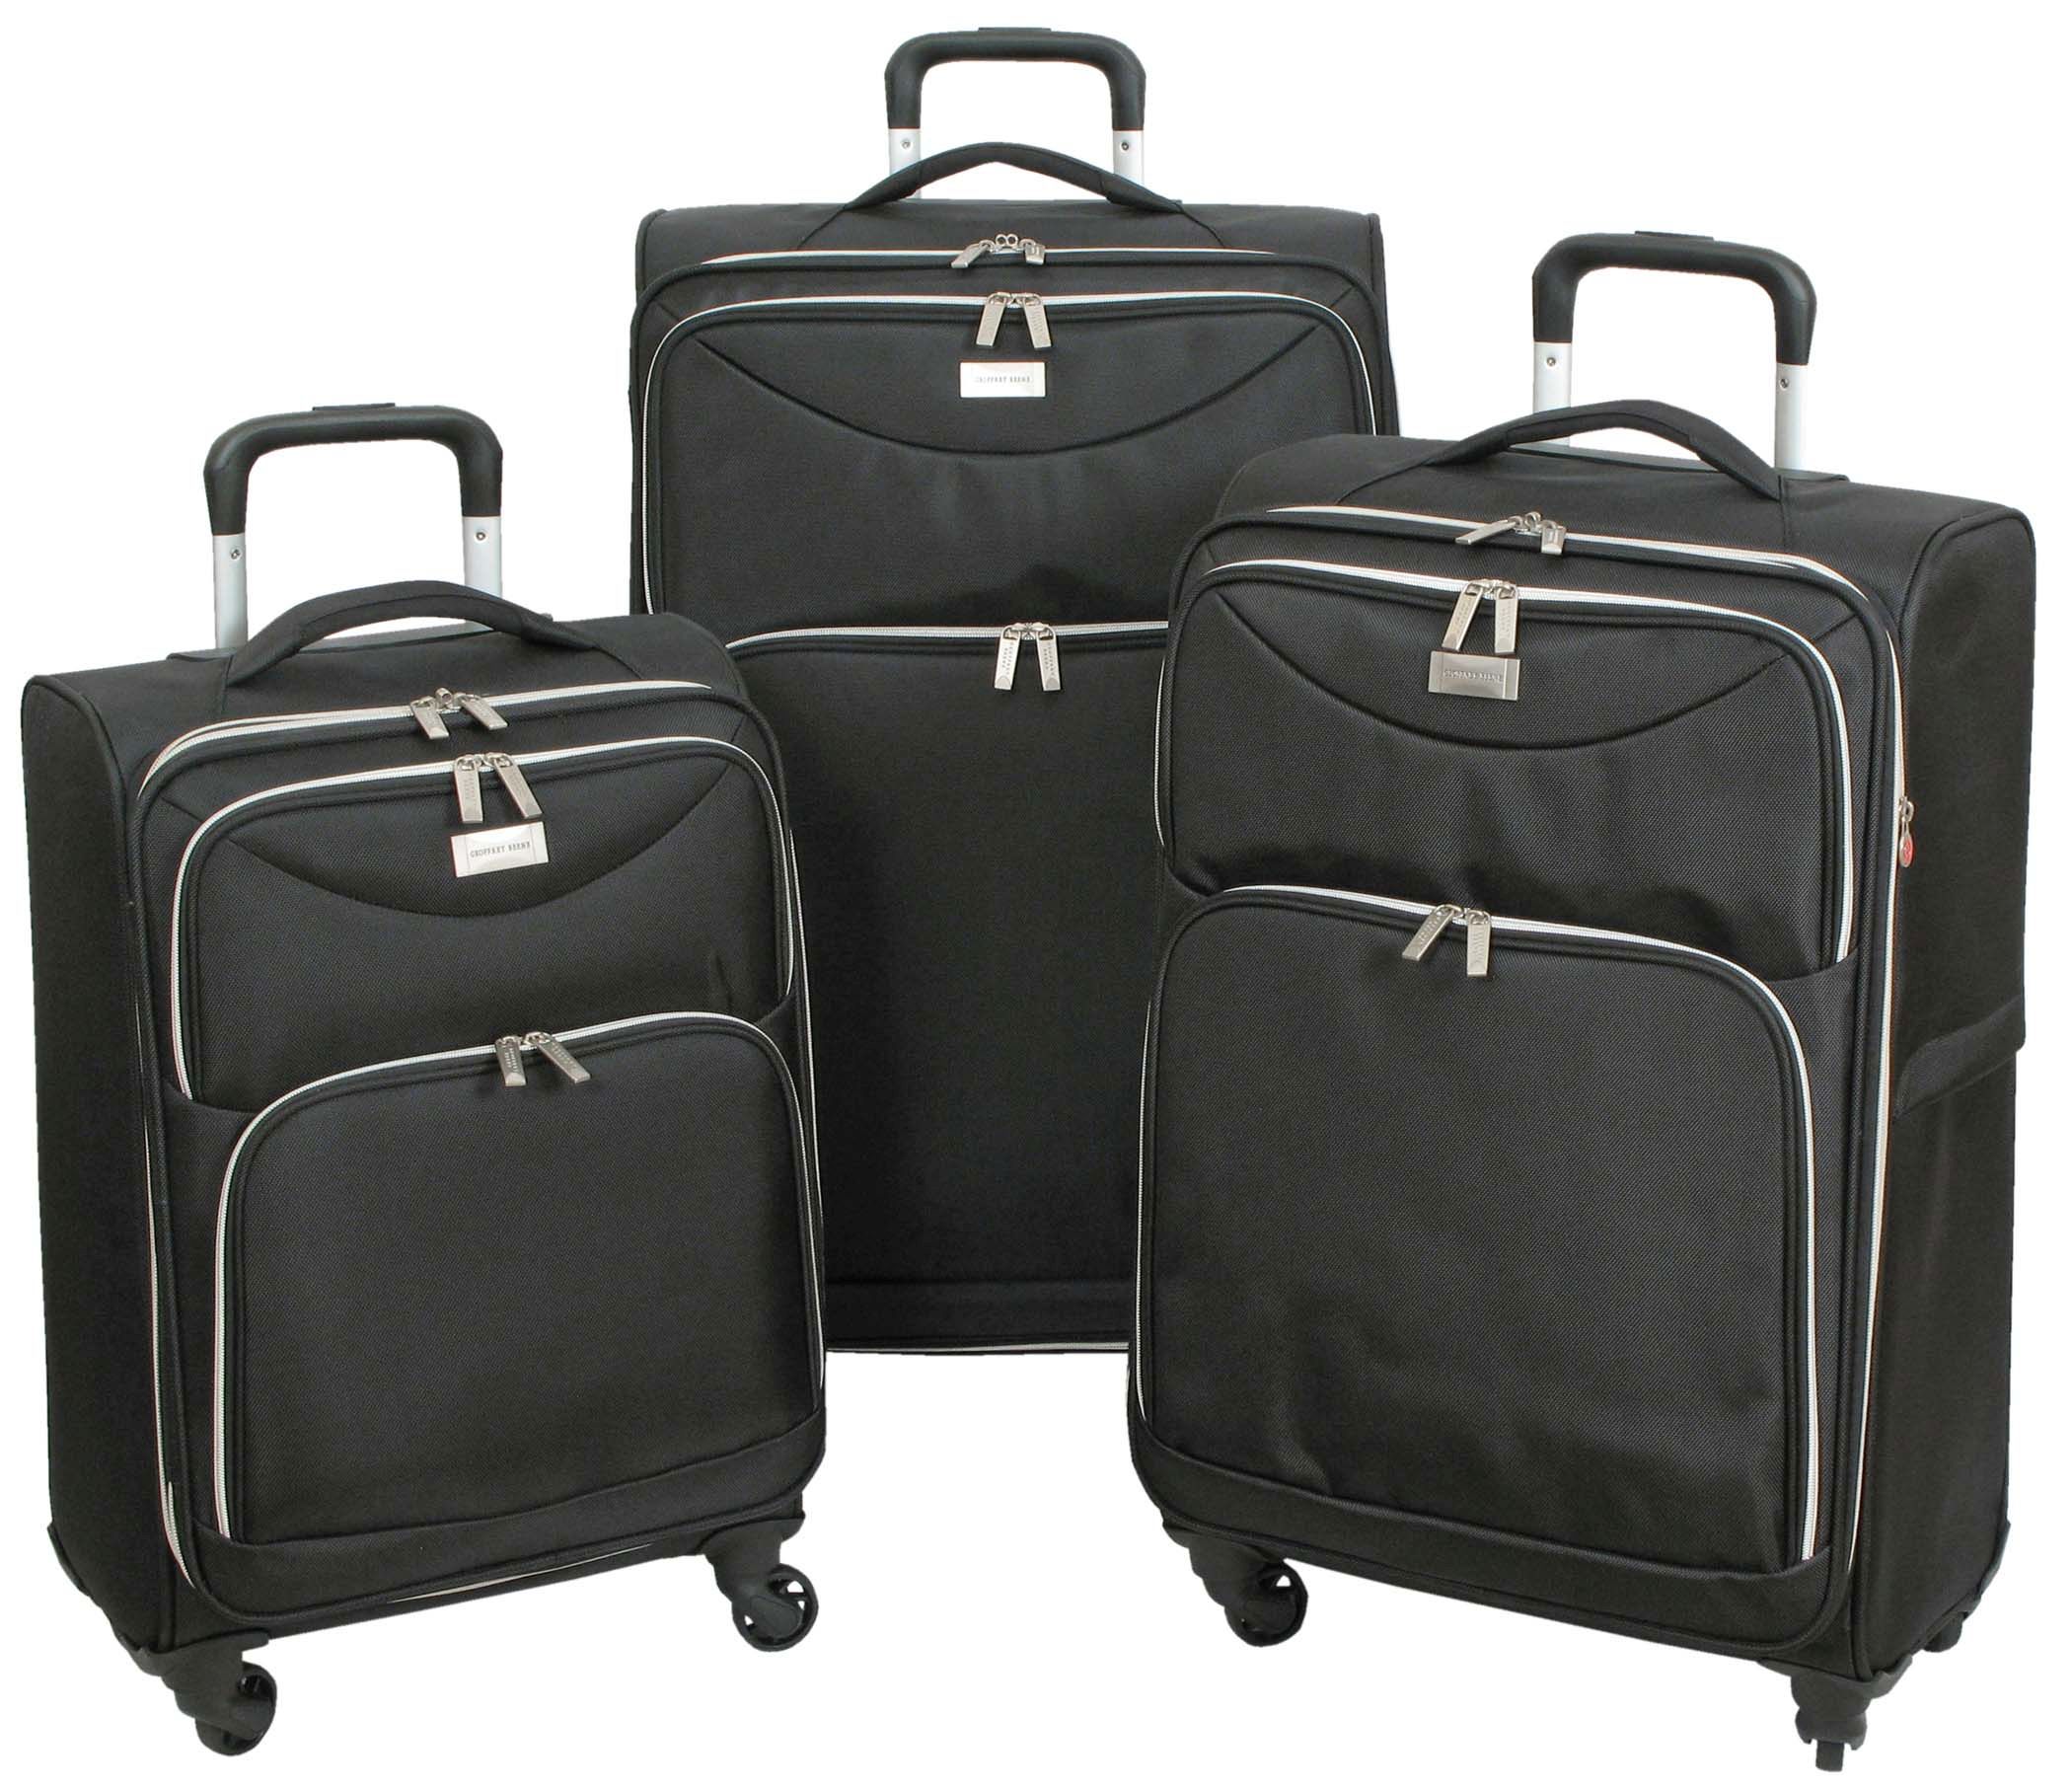 Picture of Geoffrey Beene GB3682-3 Ultra Light-Weight Midnight Spinner Luggage Set, Black